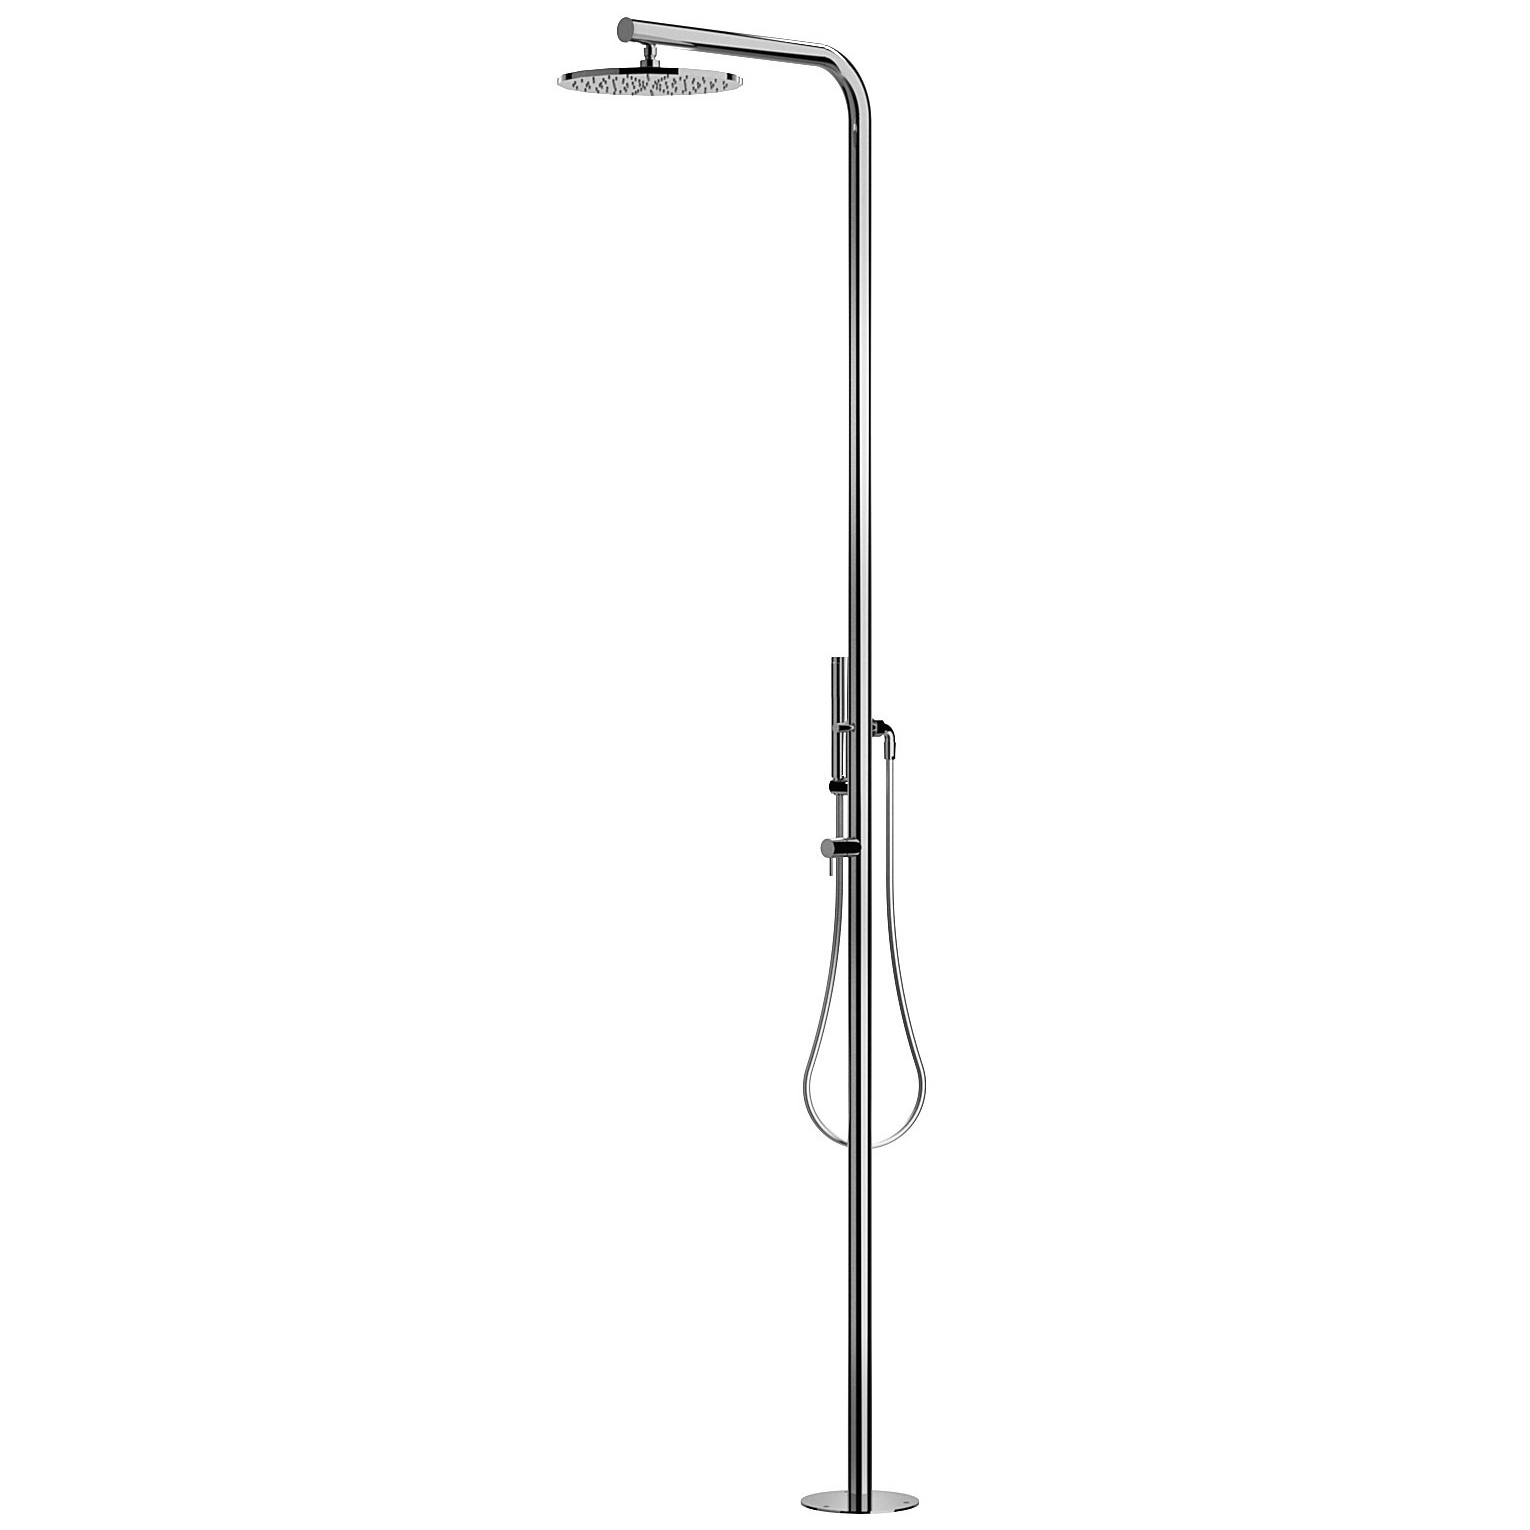 Classy C40 316 Marine Grade Stainless Steel Free Standing Hot and Cold Shower Column with Hand Spray